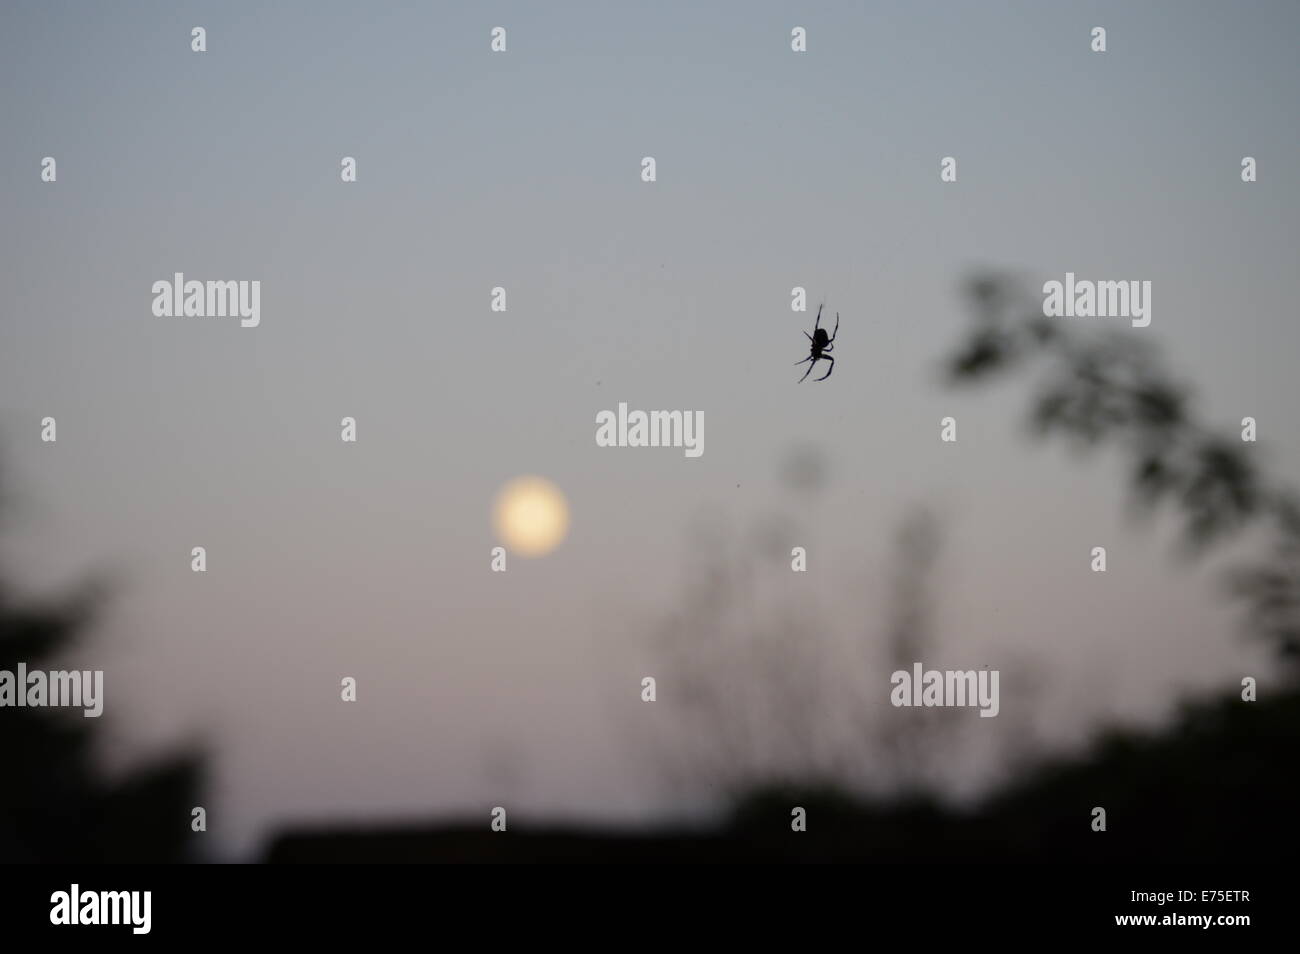 Garden spider hanging on its web as the moon rises in the background Stock Photo